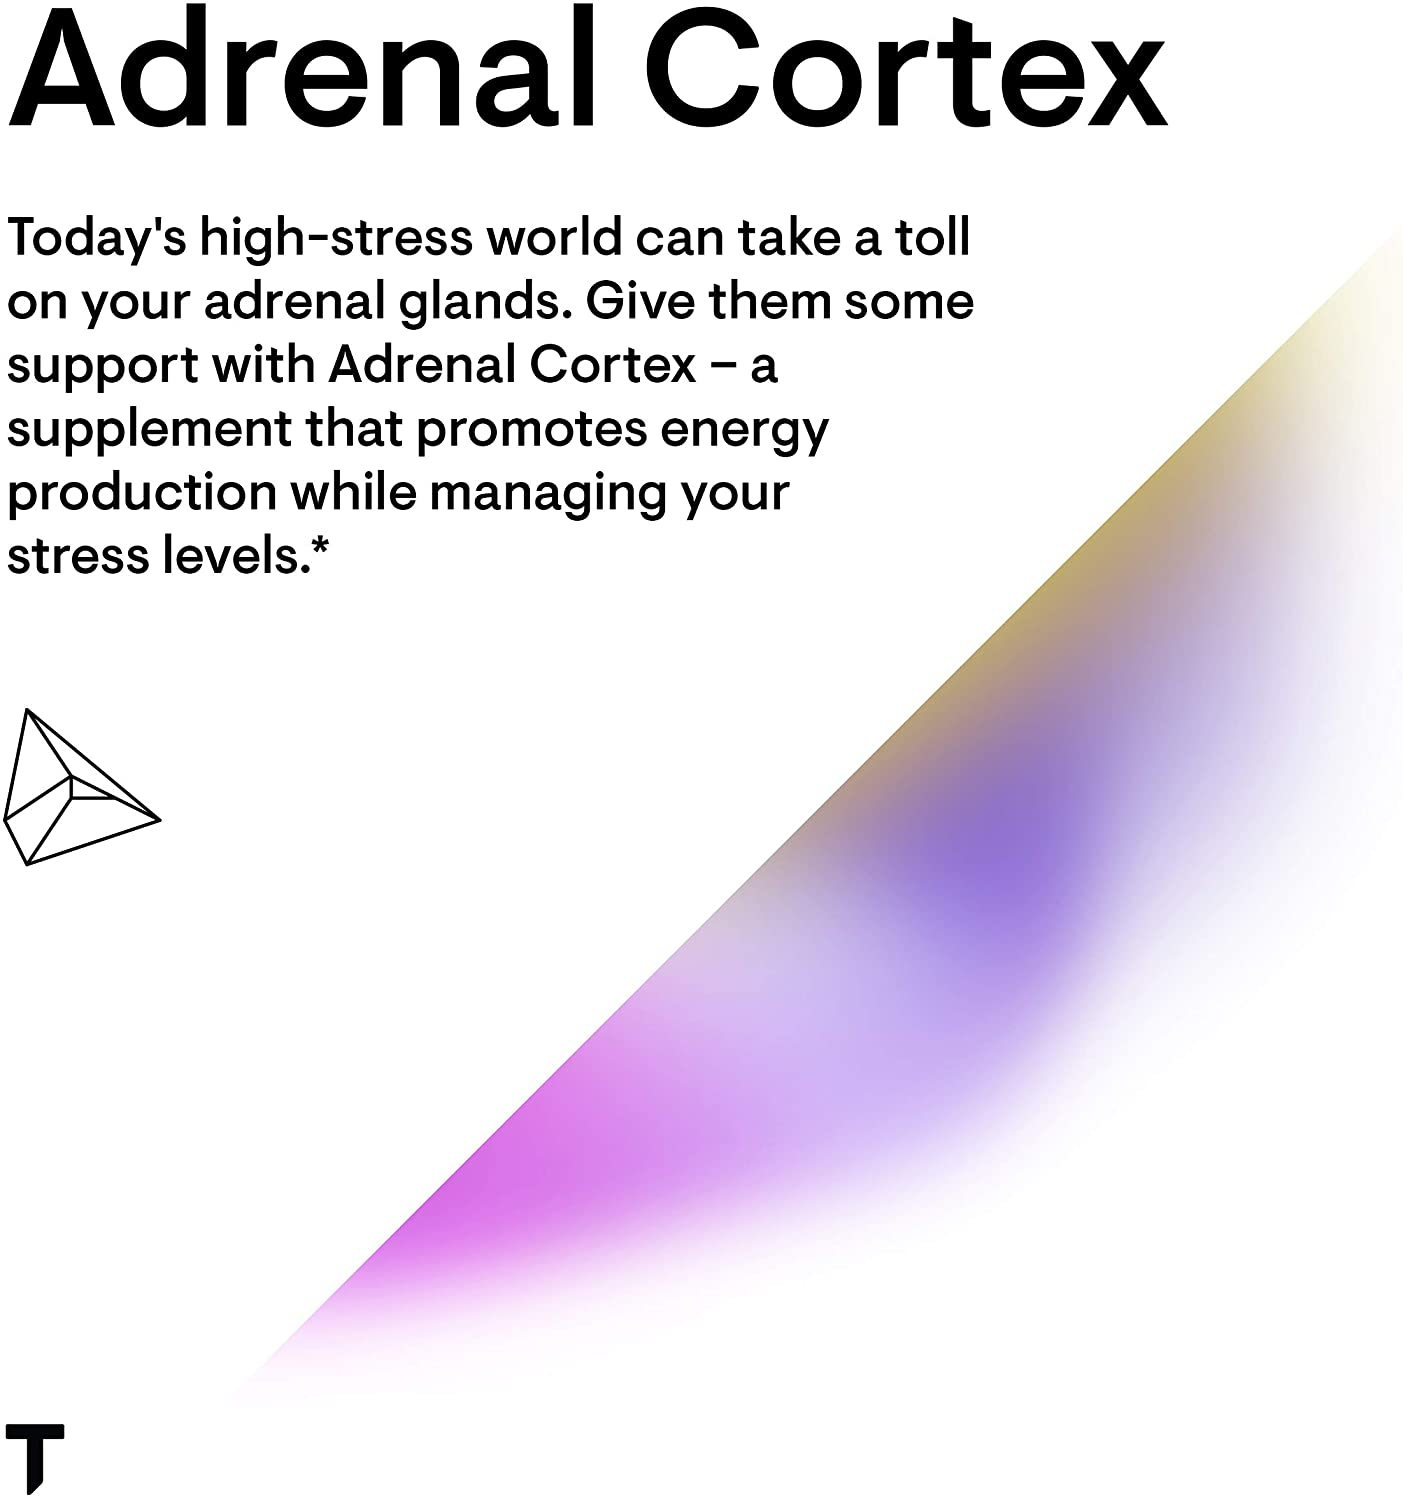 - Adrenal Cortex - Adrenal Support Supplements for Cortisol Management Support - Help Support Healthy Adrenal Function for Women & Men - 60 Capsules